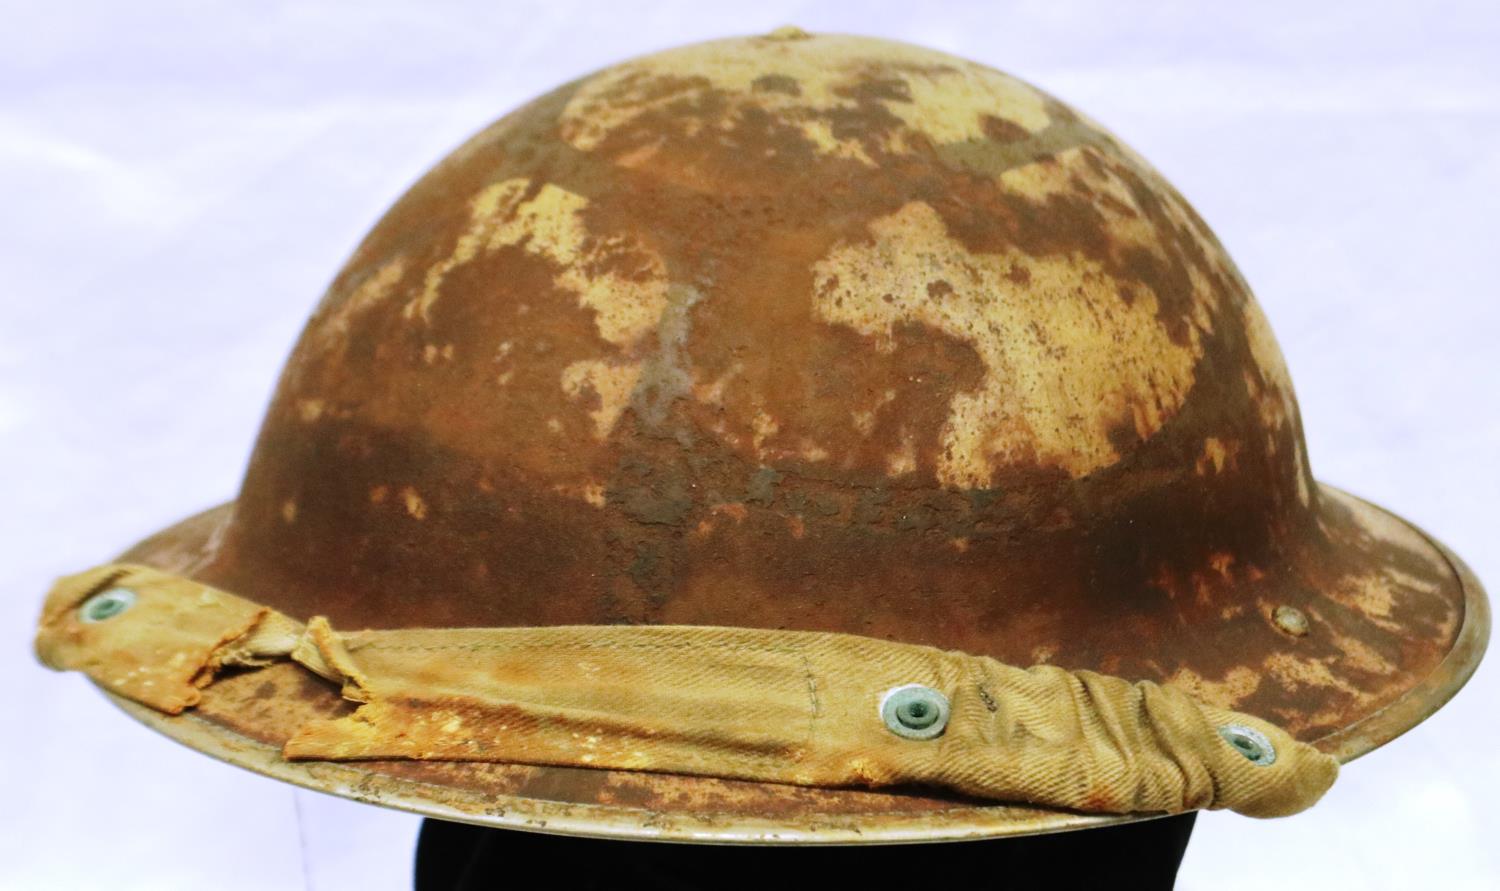 WWII British MK II helmet, painted in Malta camouflage. P&P Group 2 (£18+VAT for the first lot